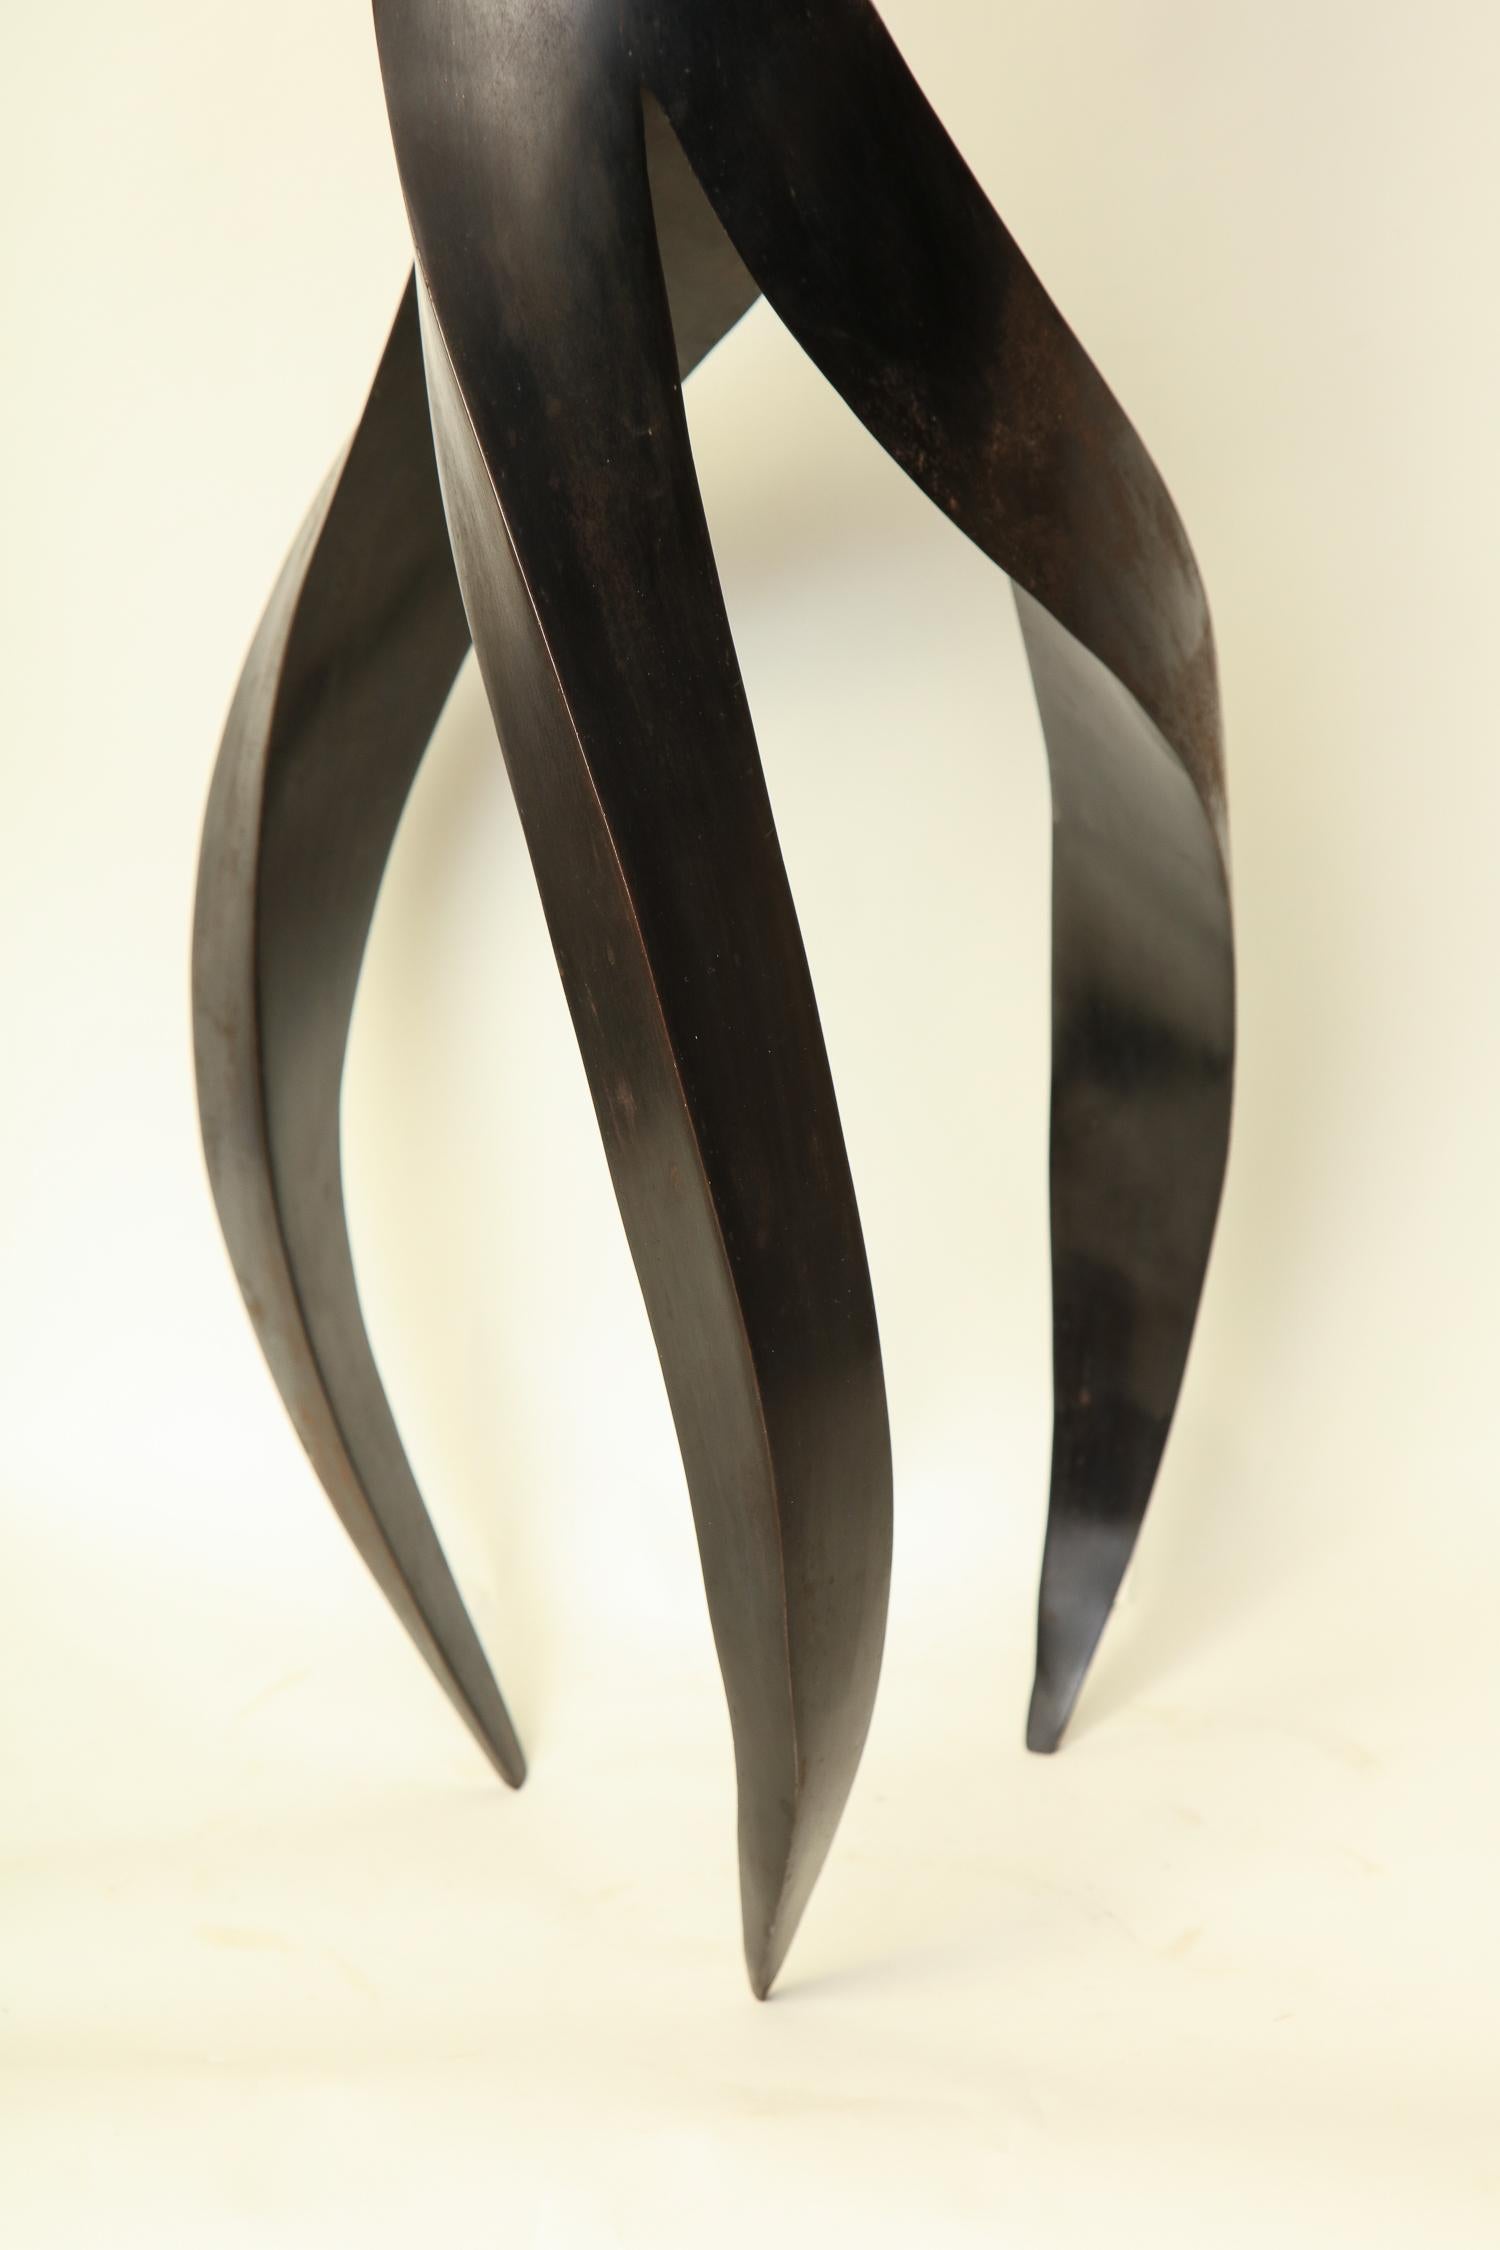 Sculpture Abstract Futurist Patinated Bronze Mid-Century Modern, Italy, 1940s For Sale 8